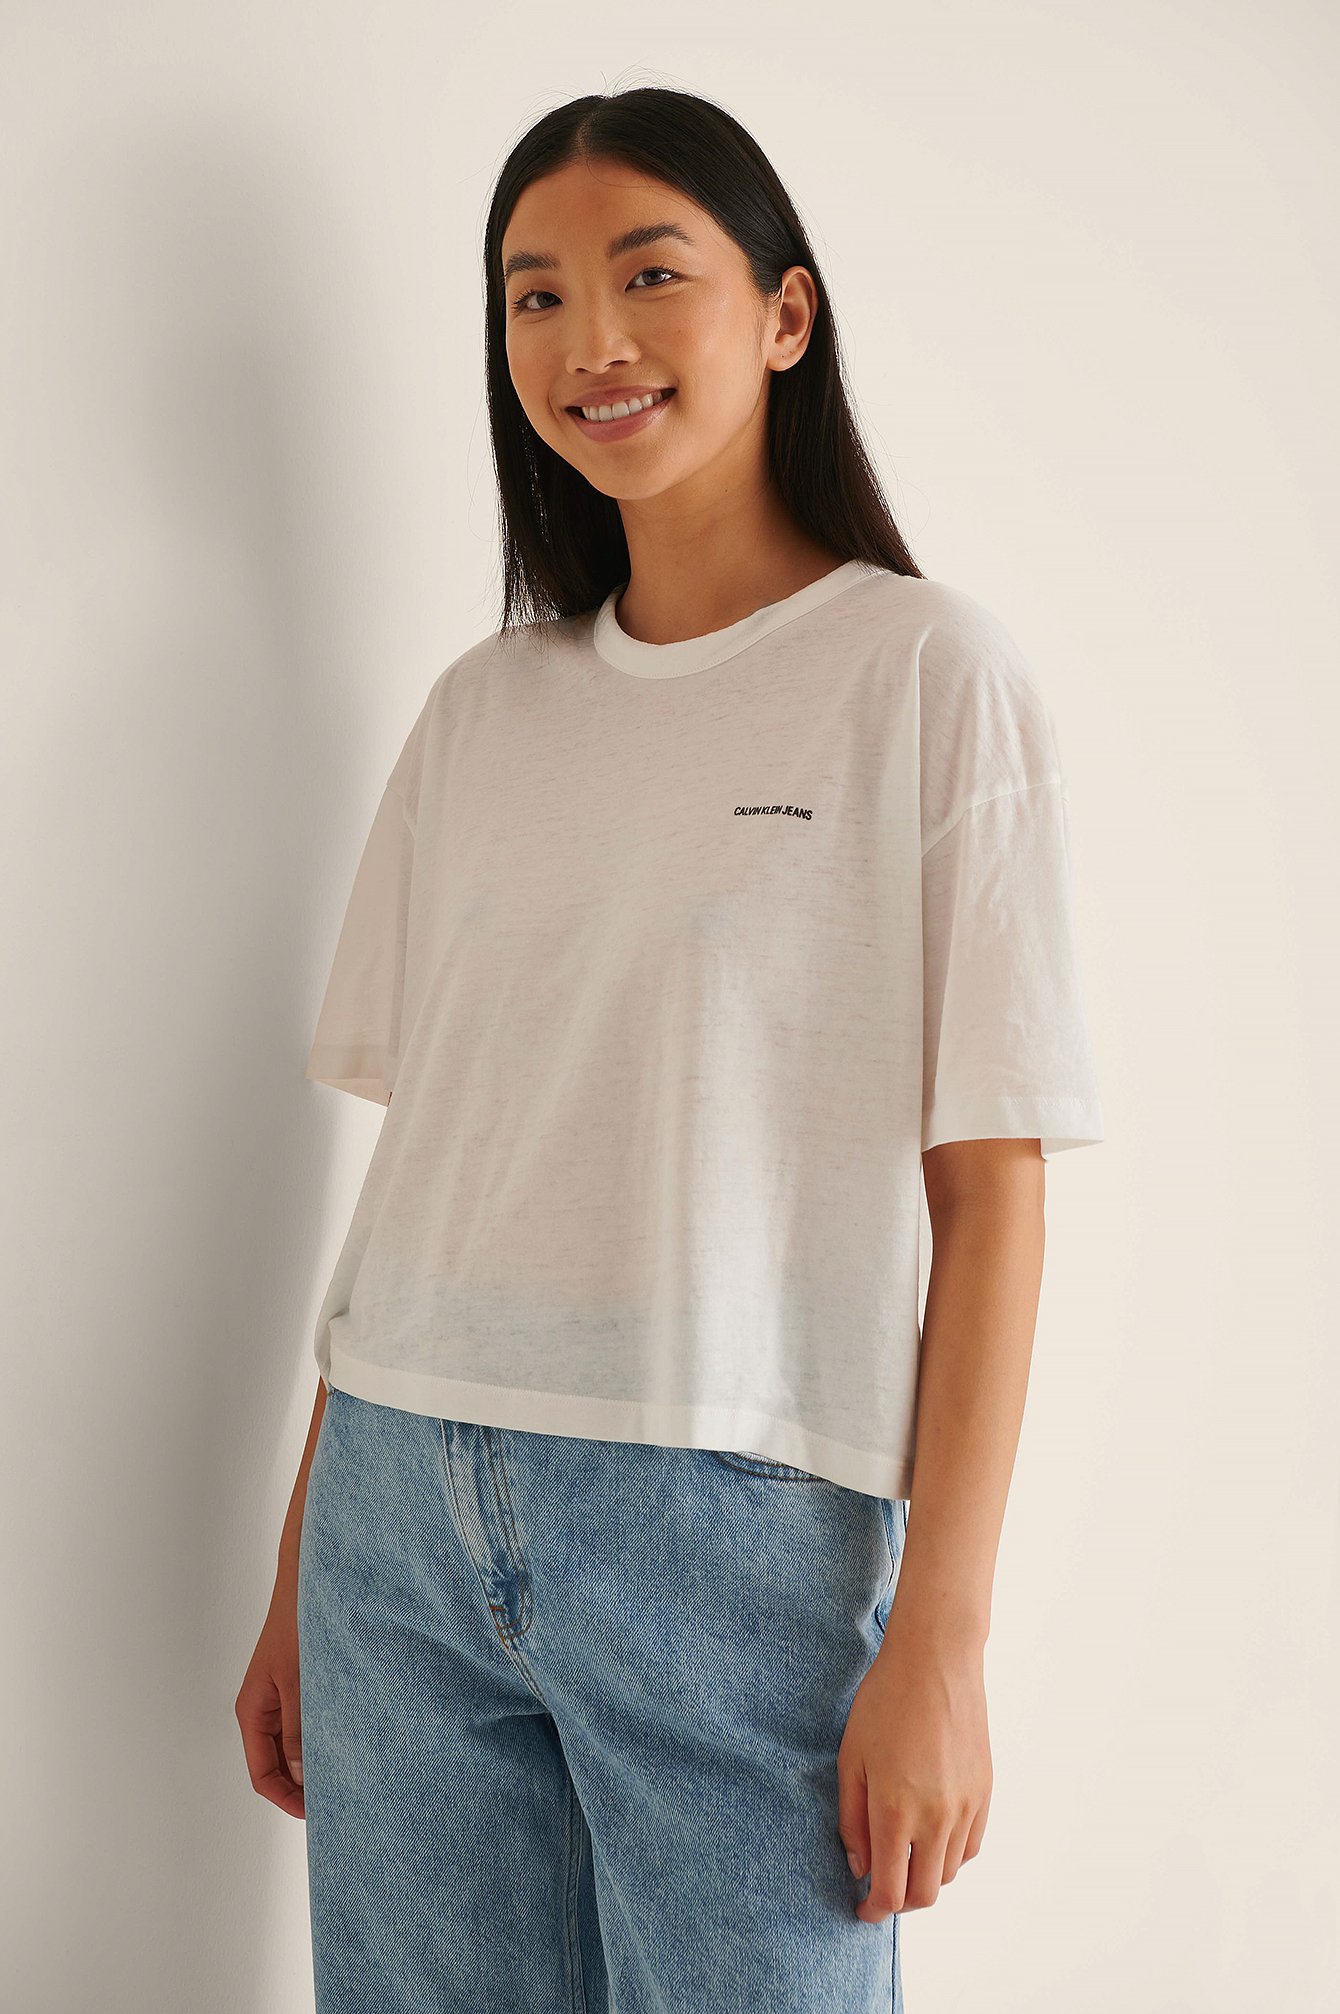 Bright White Burn Out Oversized Tee